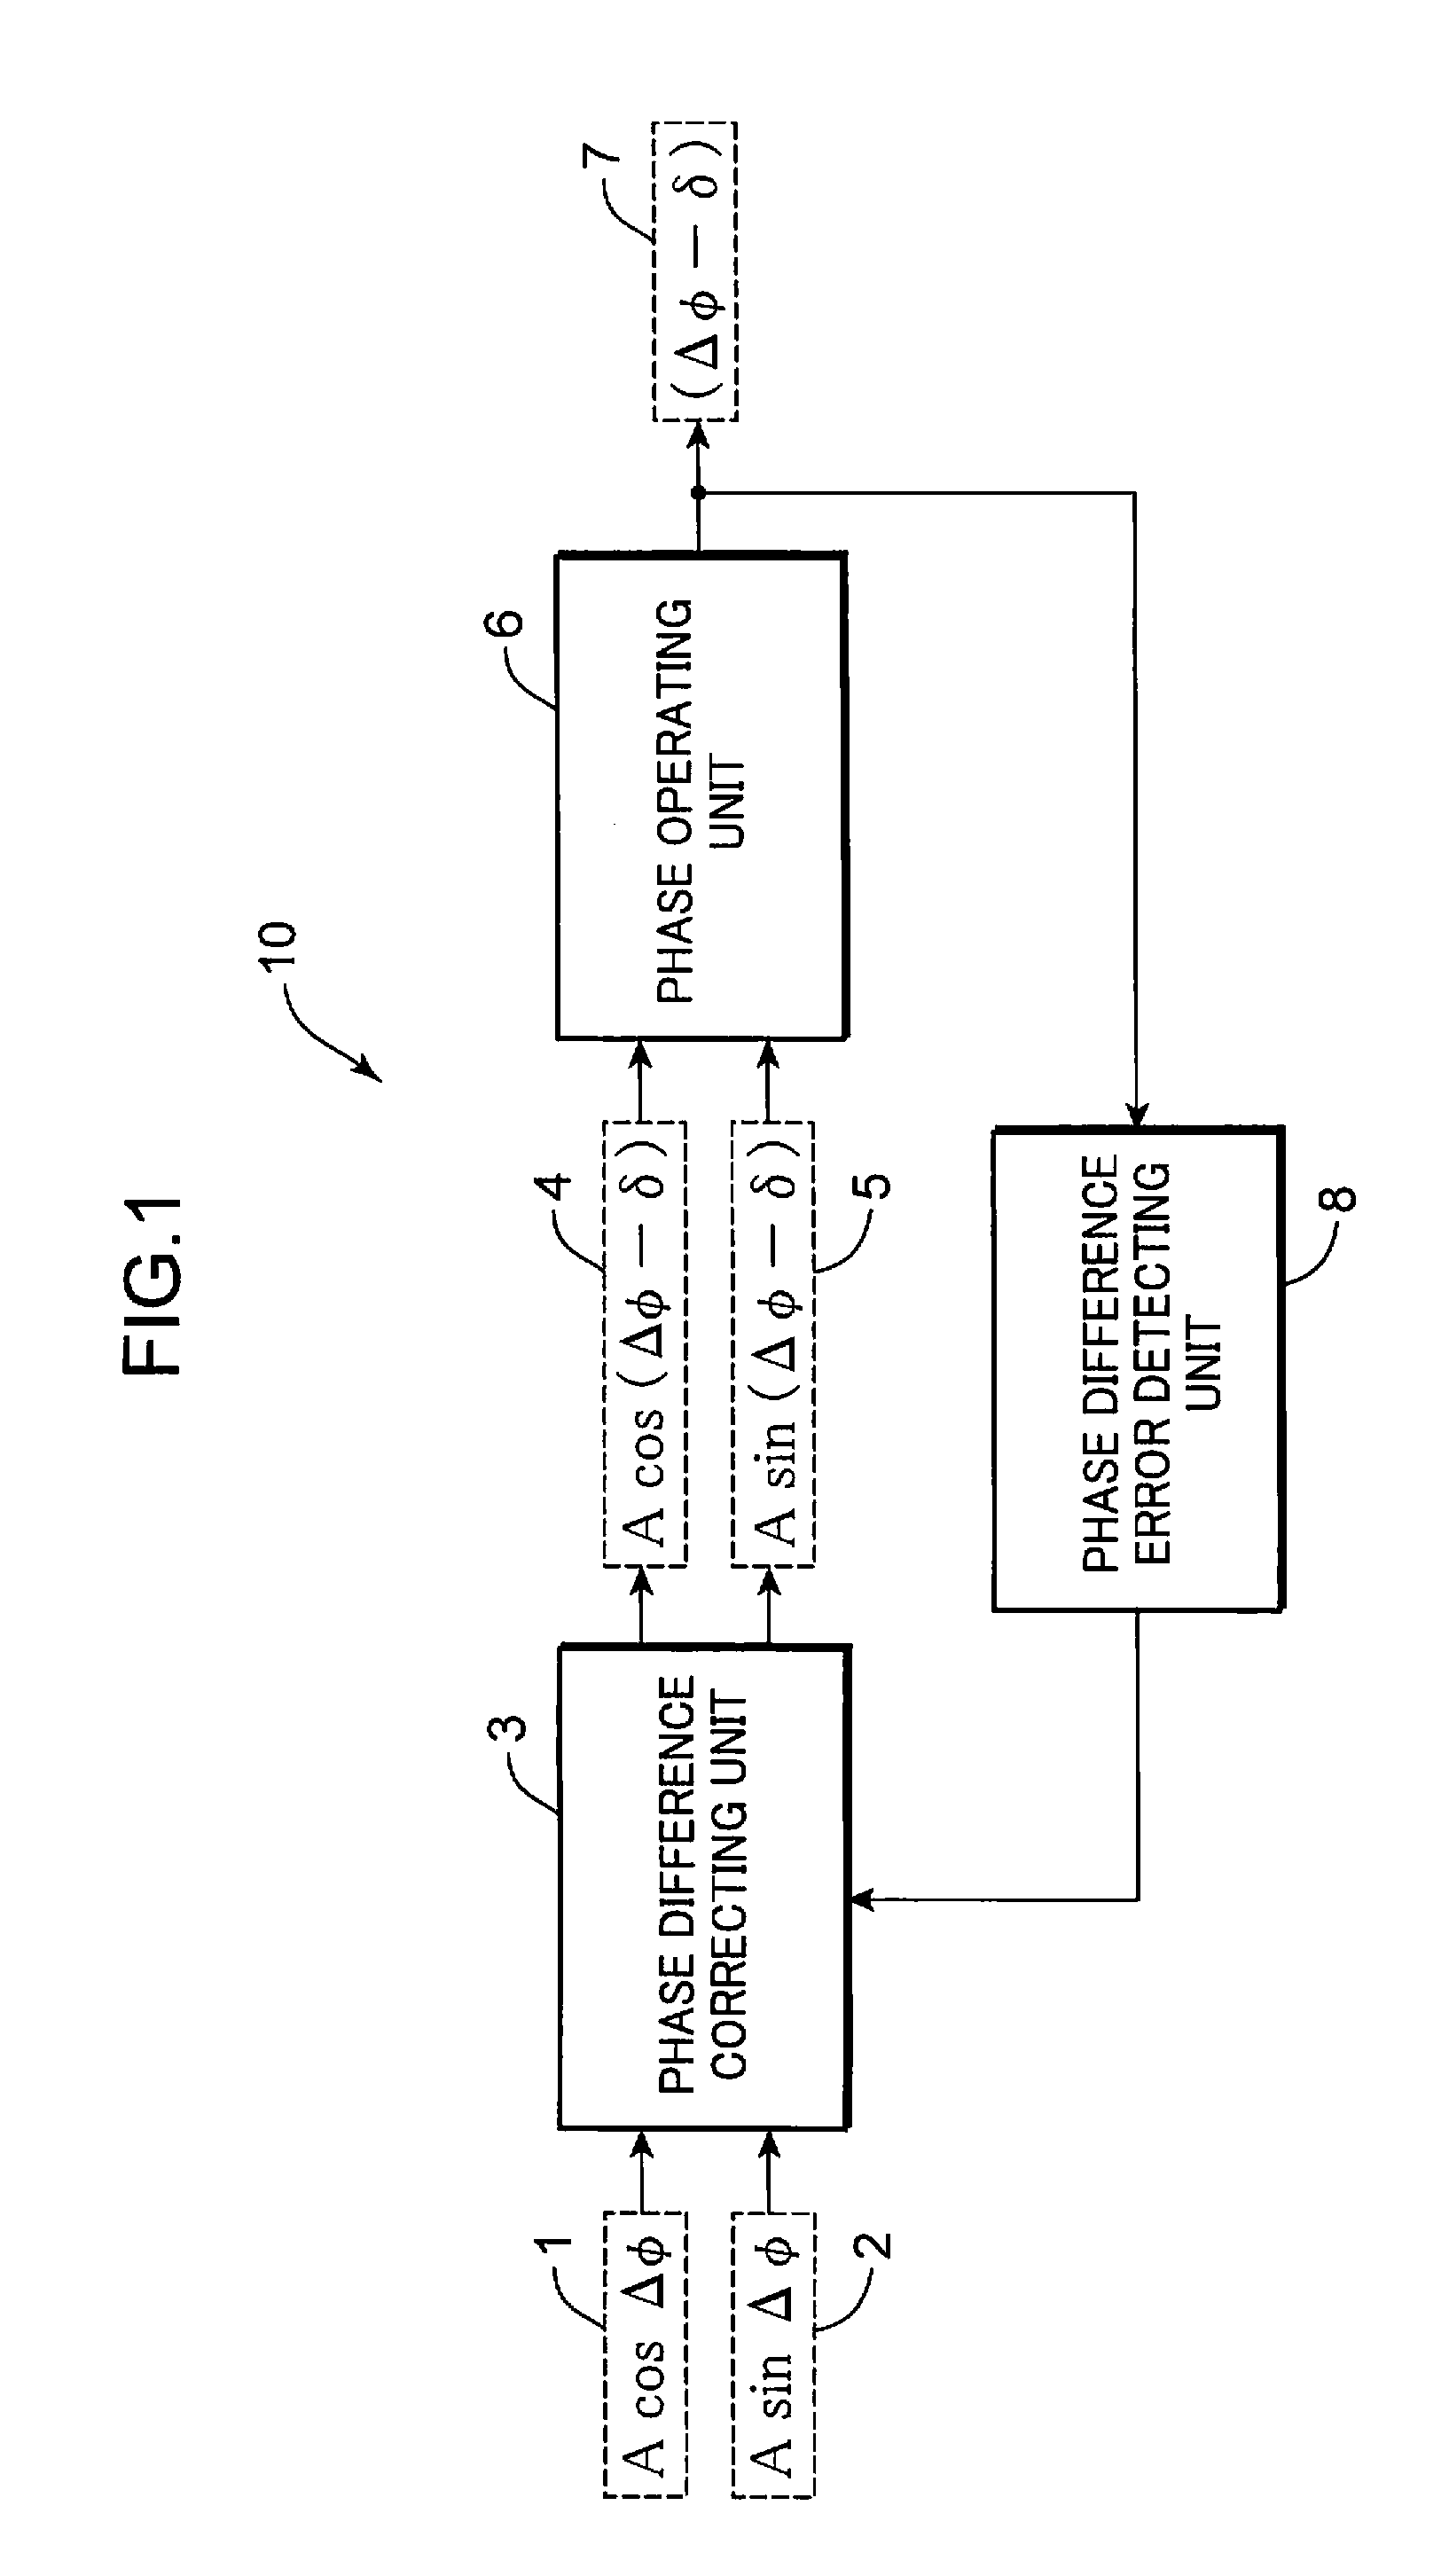 Modulated signal detecting apparatus and modulated signal detecting method